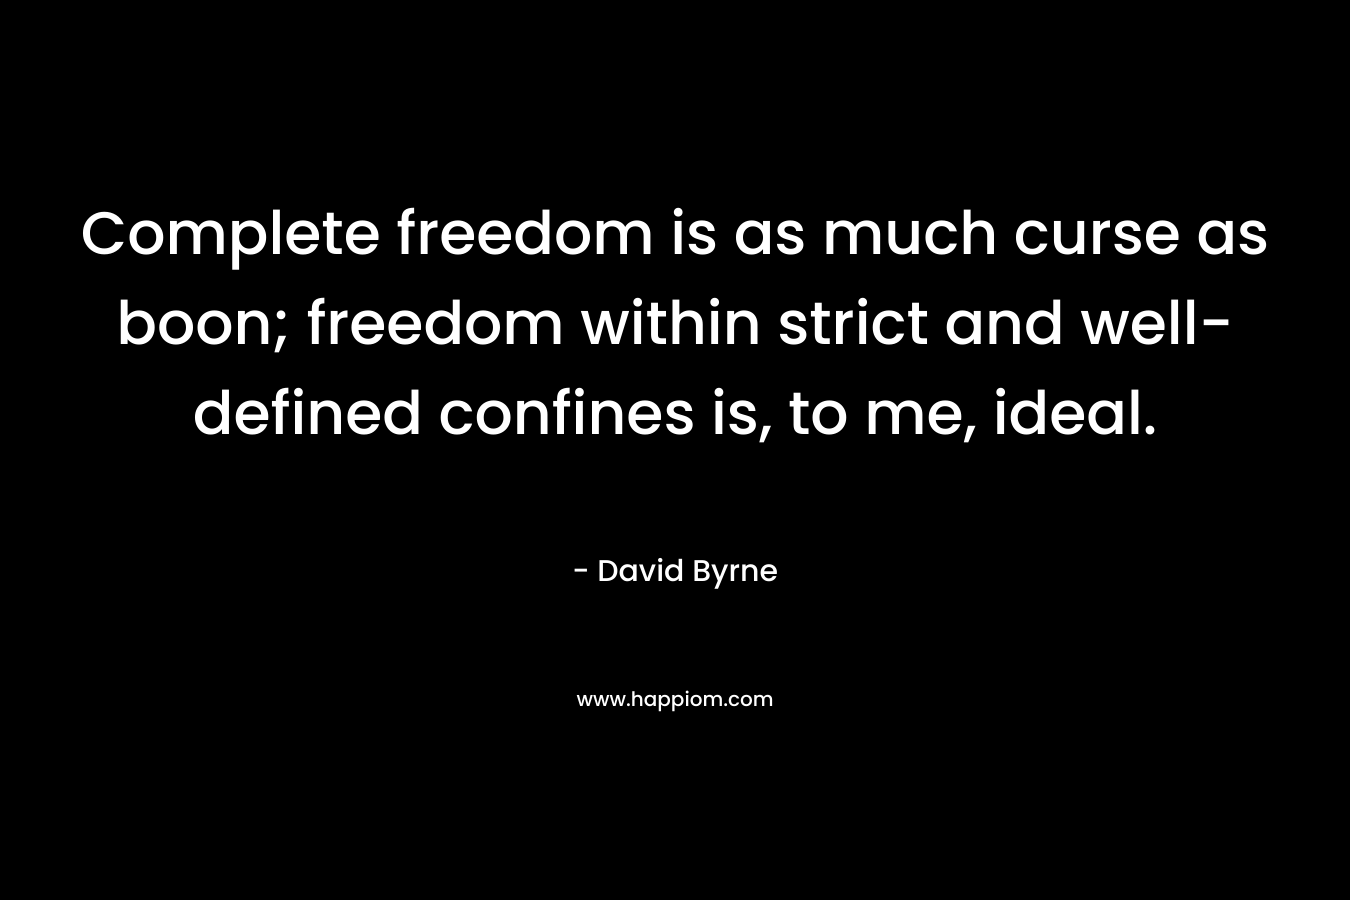 Complete freedom is as much curse as boon; freedom within strict and well-defined confines is, to me, ideal.